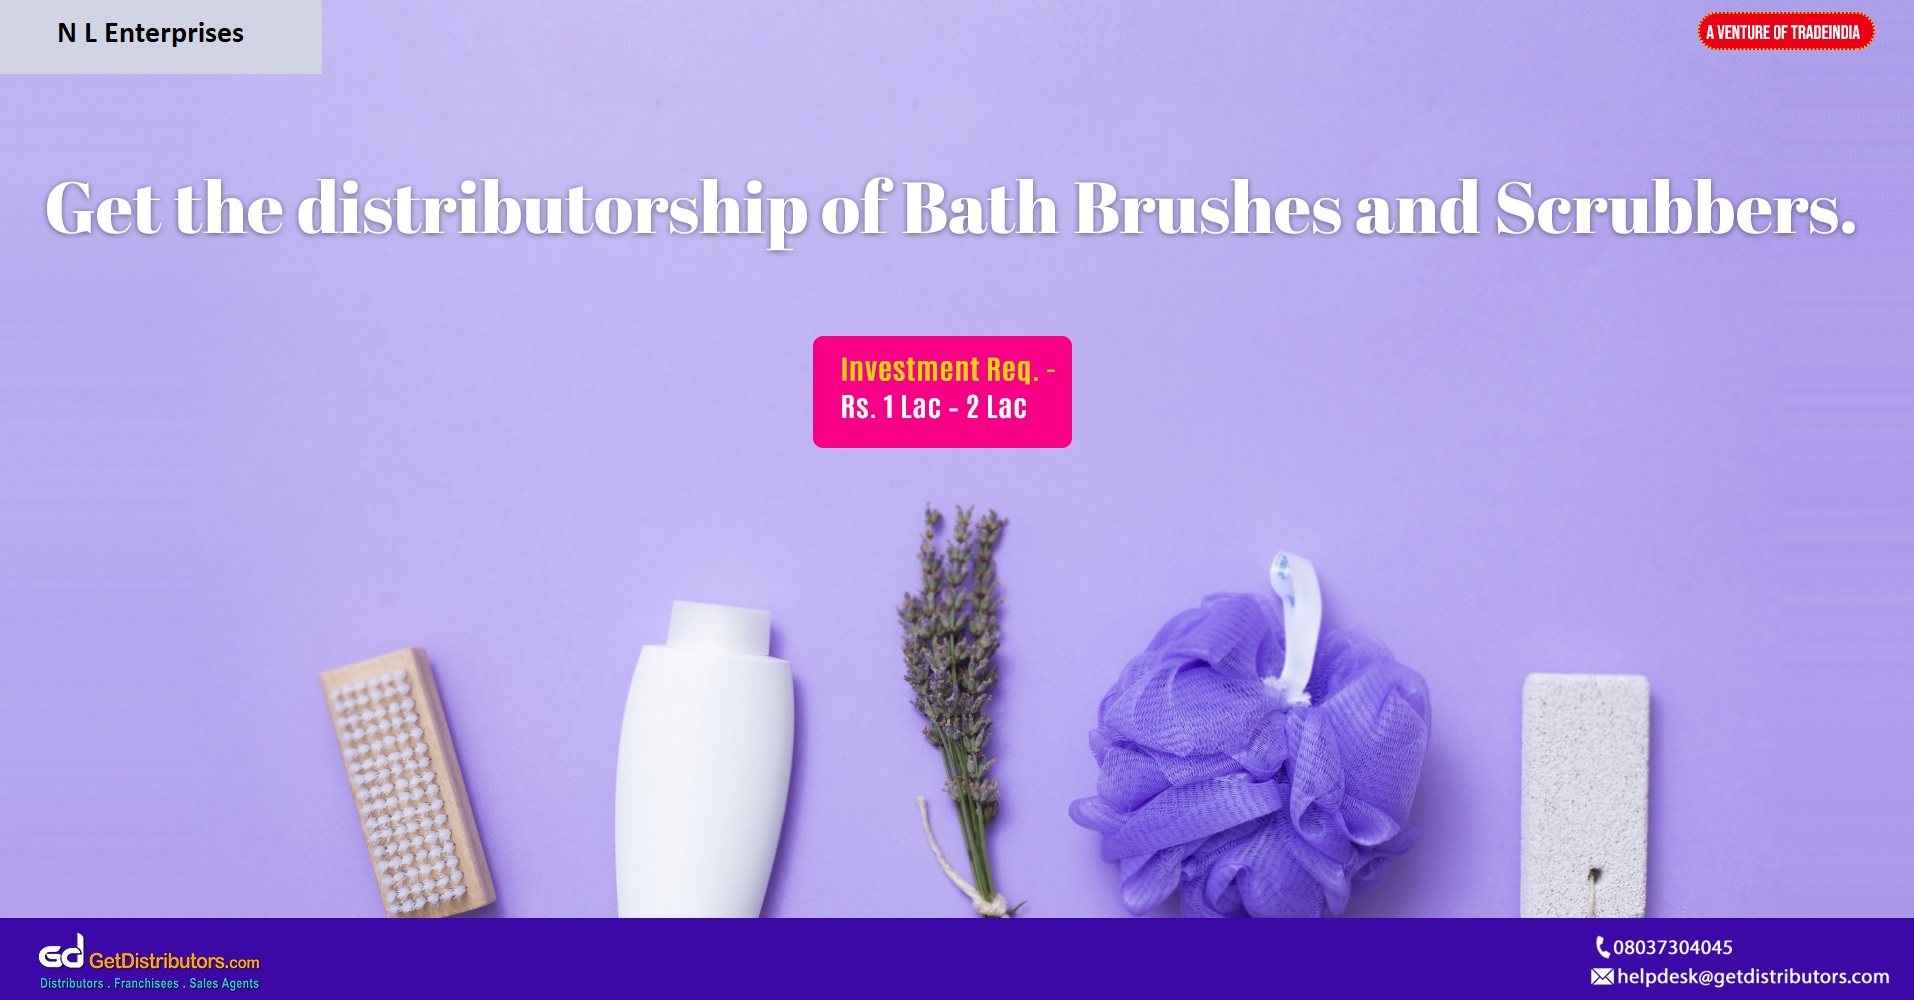 Presenting to you a wide range of bath brushes and scrubbers for distribution